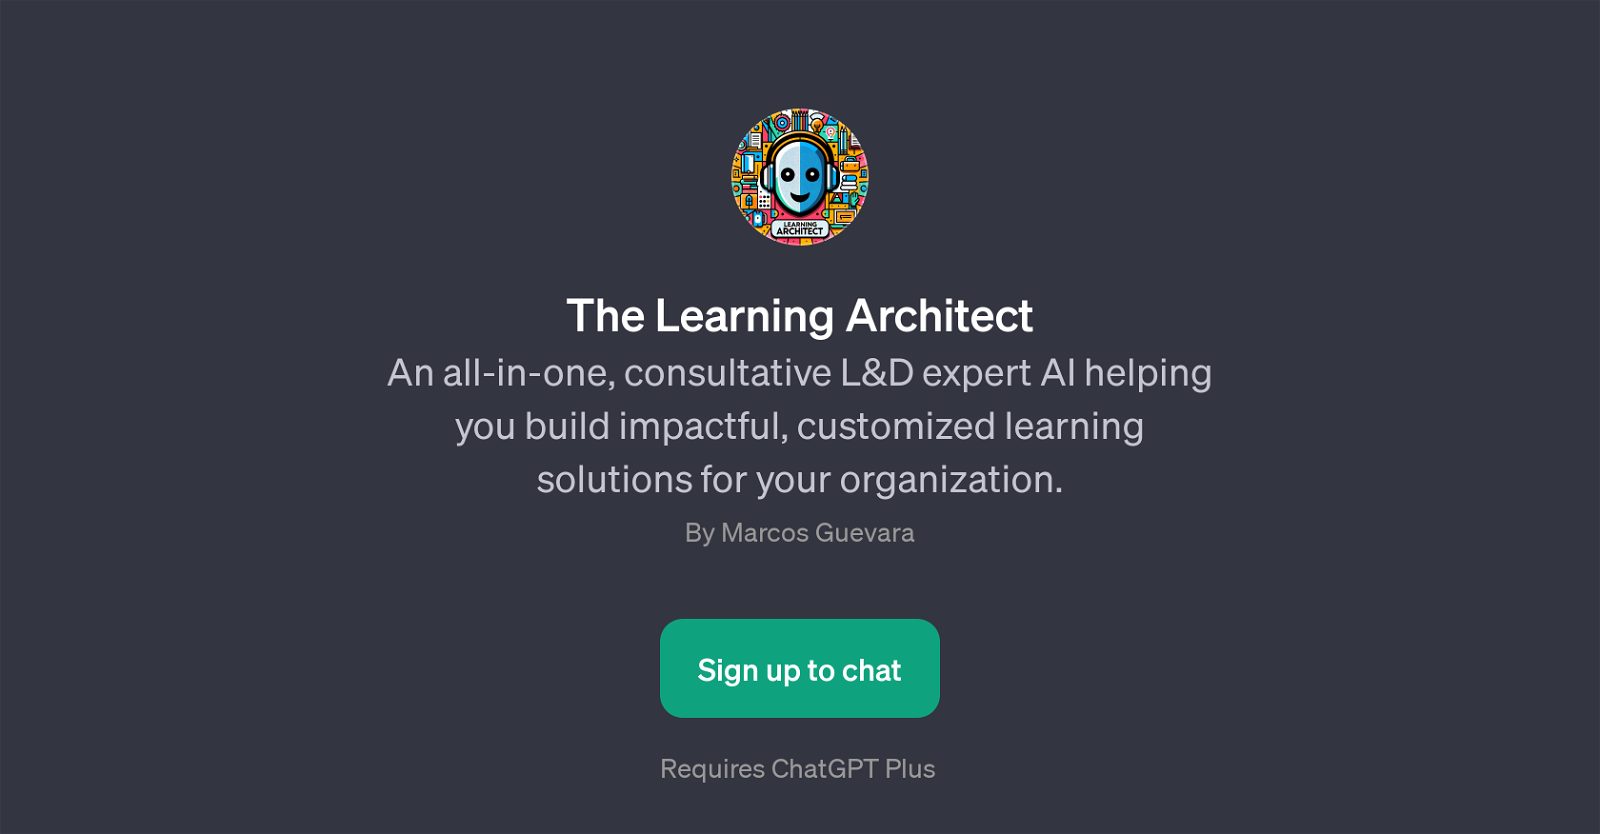 The Learning Architect website